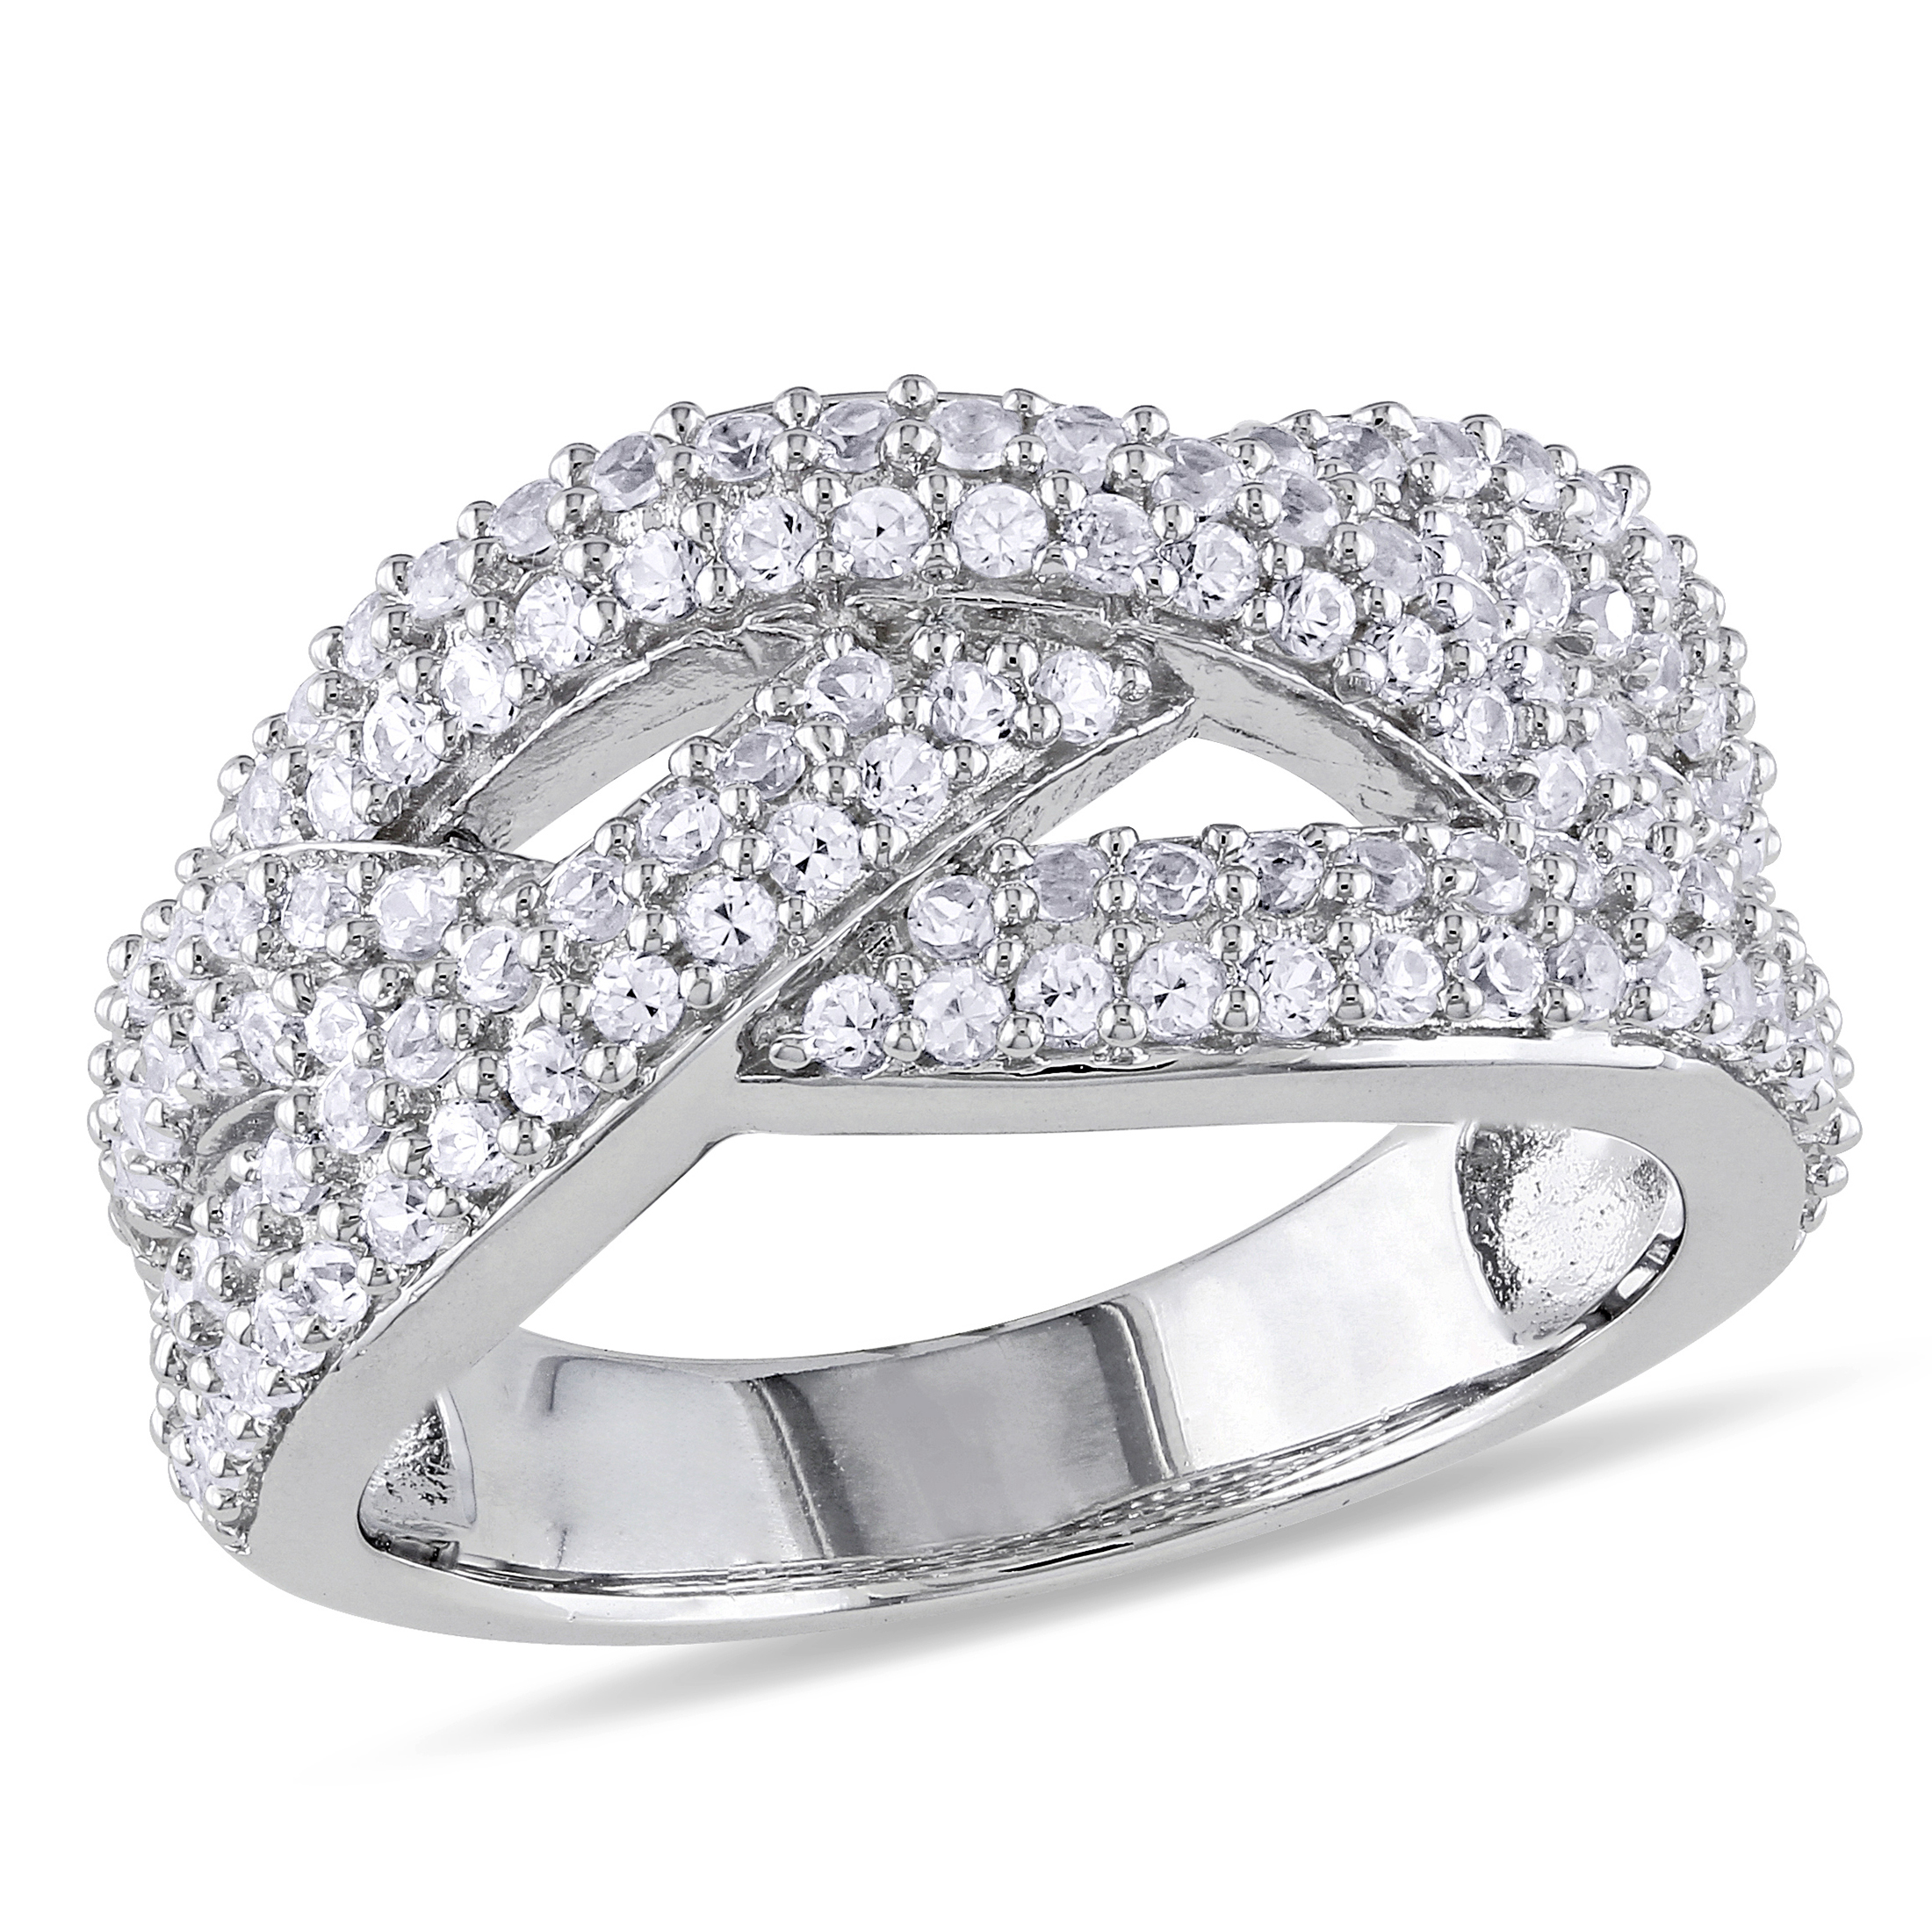 Everly Women's 1 1/4 CT T.G.W. Round-Cut Created White Sapphire Sterling Silver Multi-Row Criss Cross Ring with Prong Setting - image 1 of 7